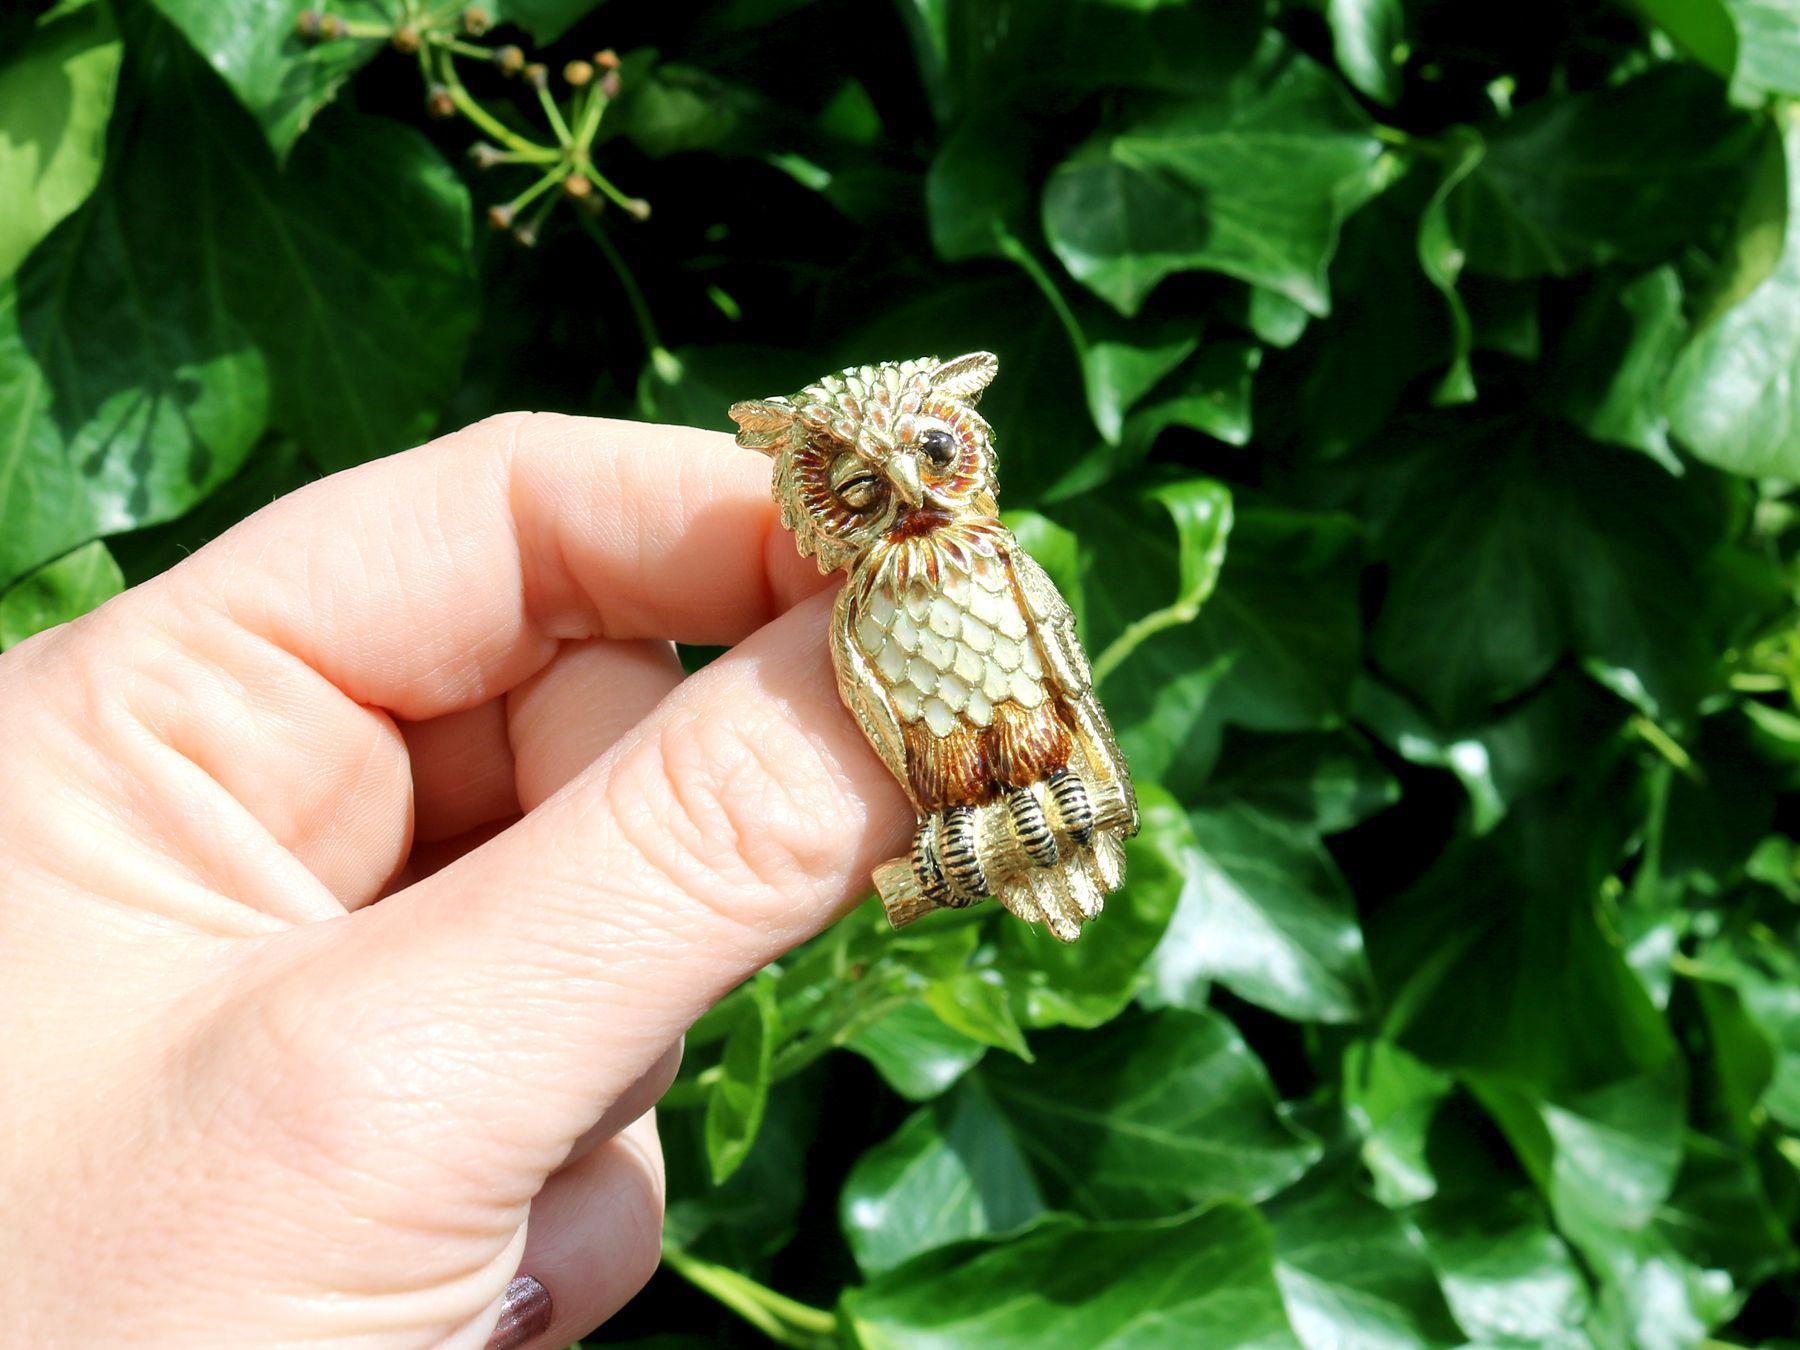 A stunning vintage 1950's 0.11 carat cat's eye, hot enamel and 18 karat yellow gold owl brooch made by Tiffany & Co; part of our diverse diamond jewellery and estate jewelry collections.

This stunning, fine and impressive vintage brooch has been